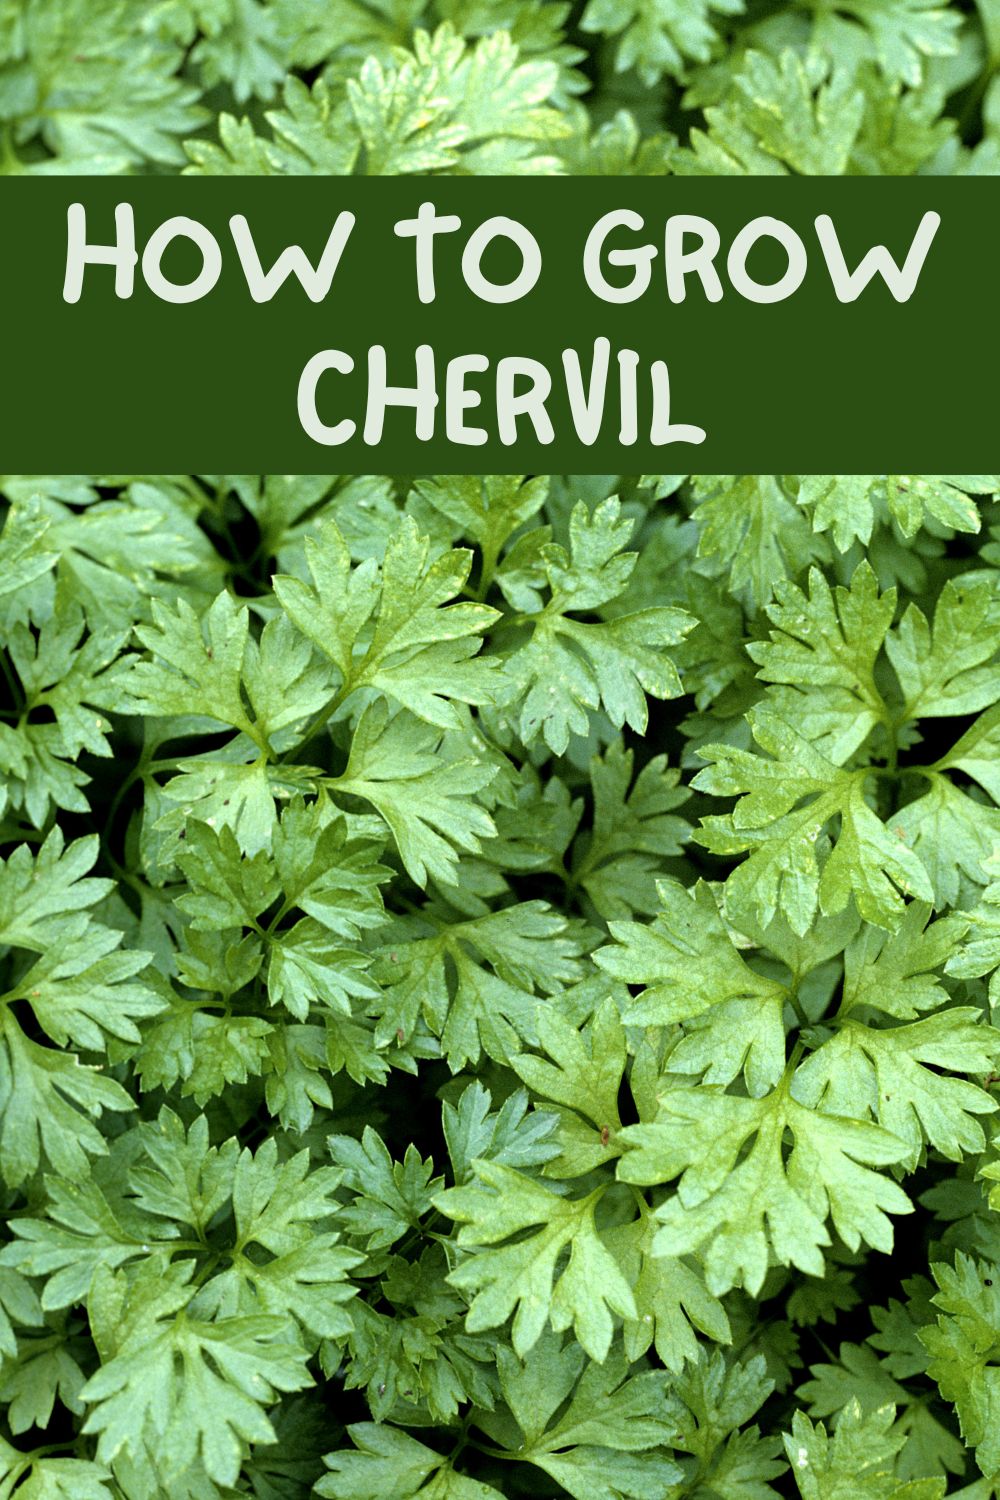 How to grow chervil.